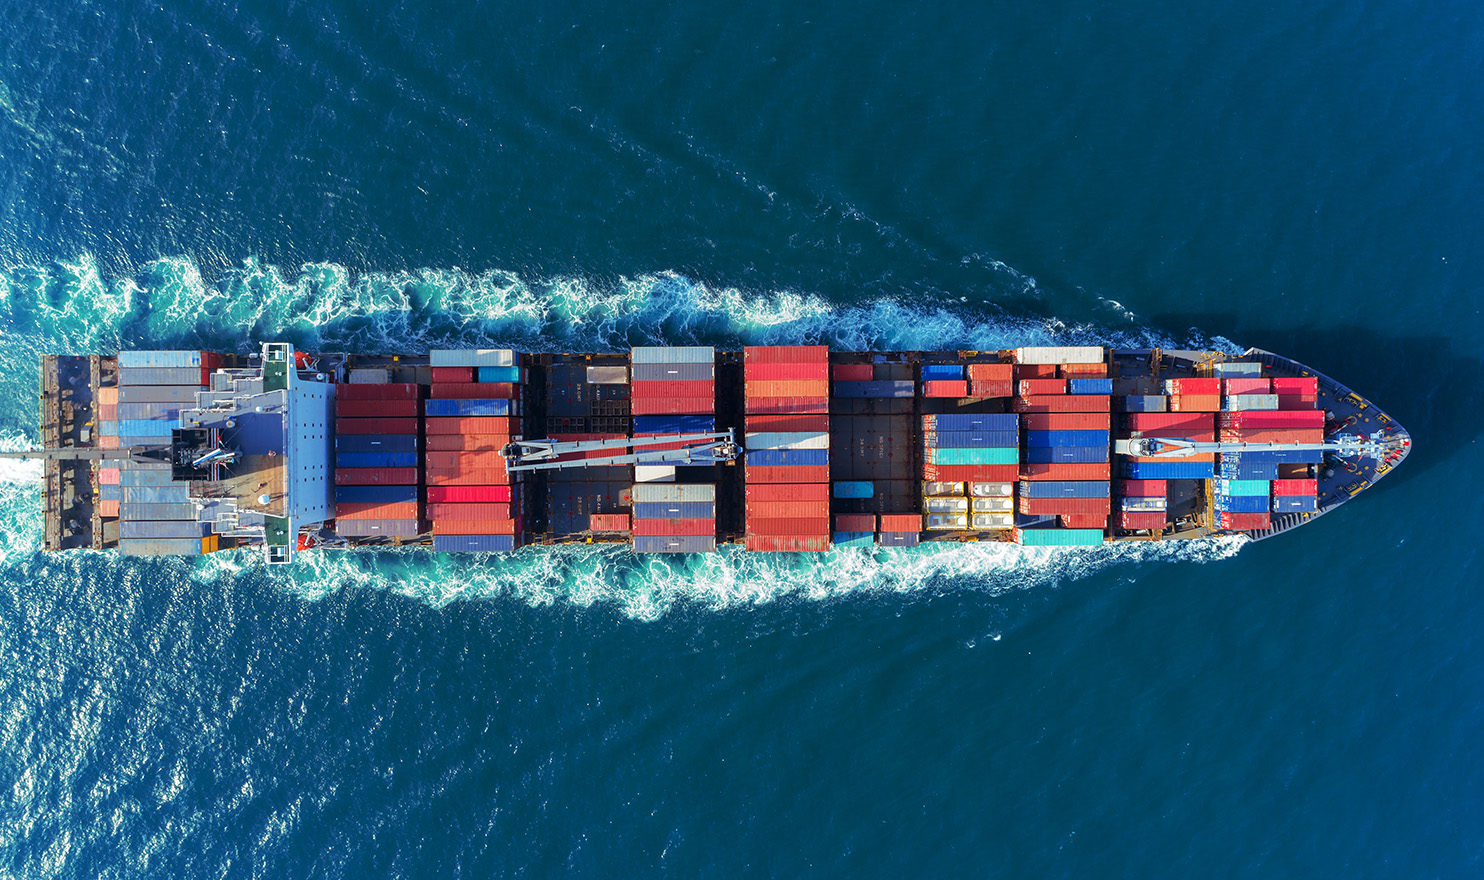 The overhead view of a cargo ship full of colorful shipping containers transporting products overseas with product liability insurance.